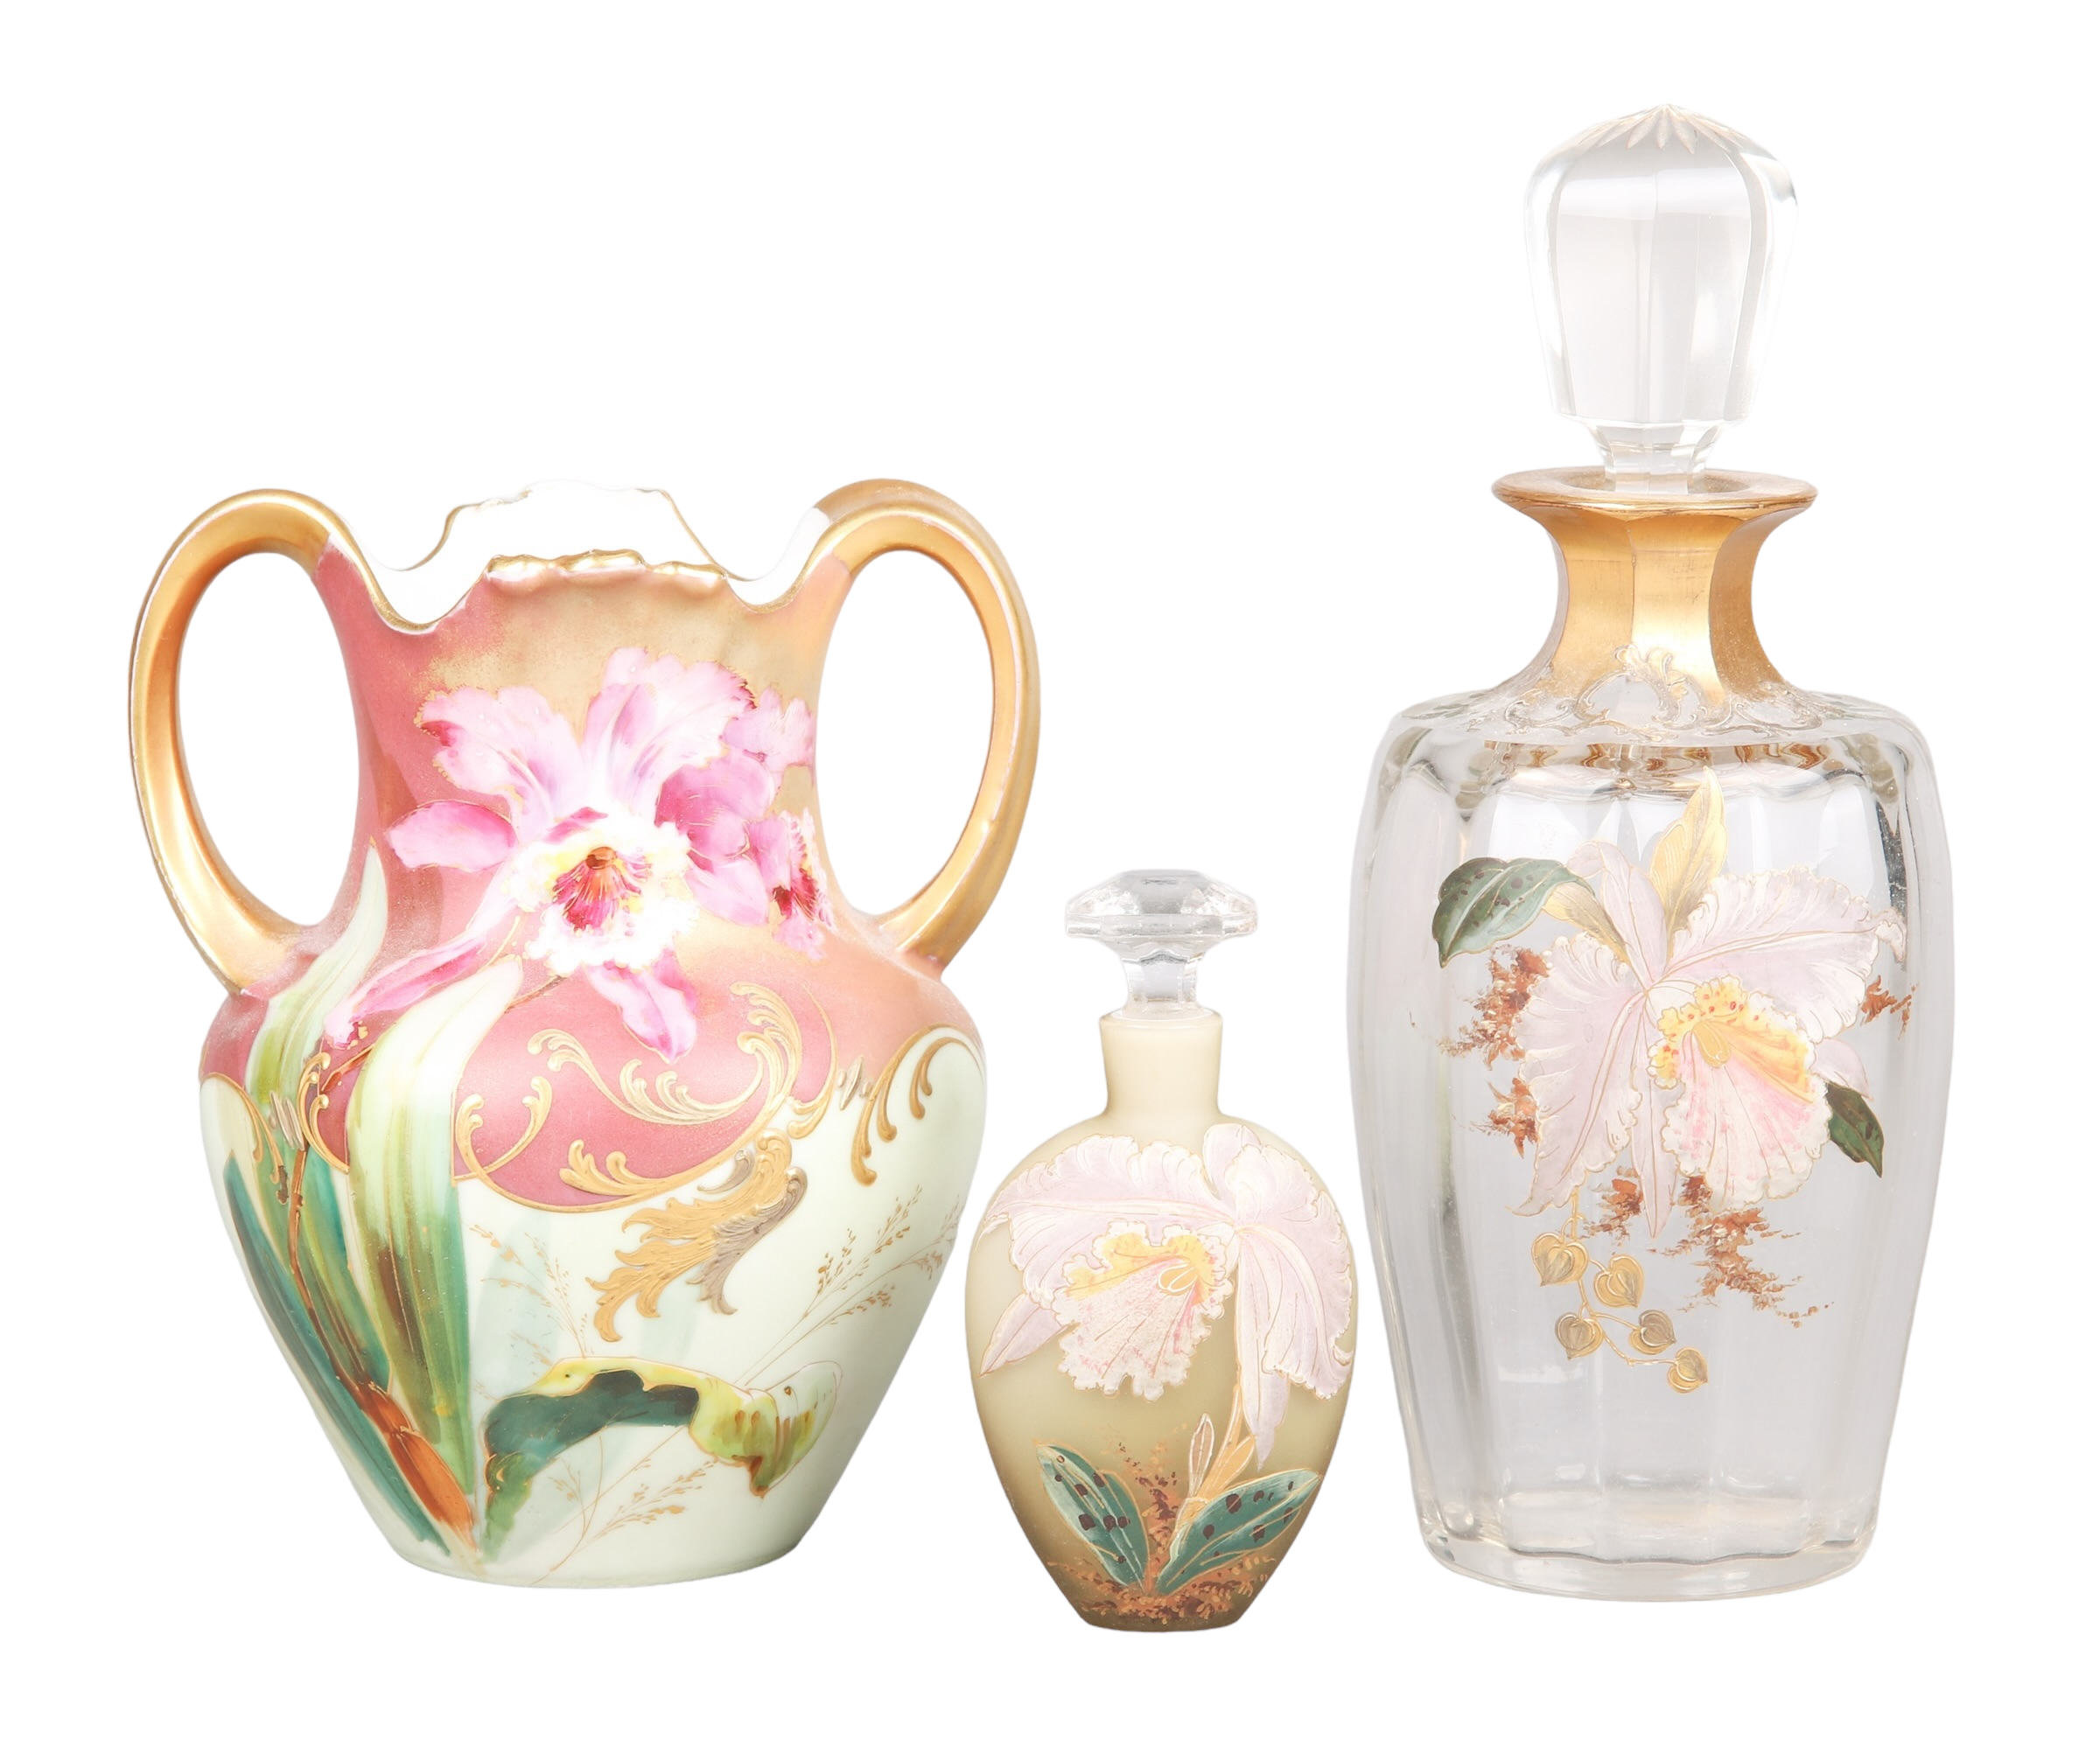 Glass and porcelain scent bottles 2e15ca